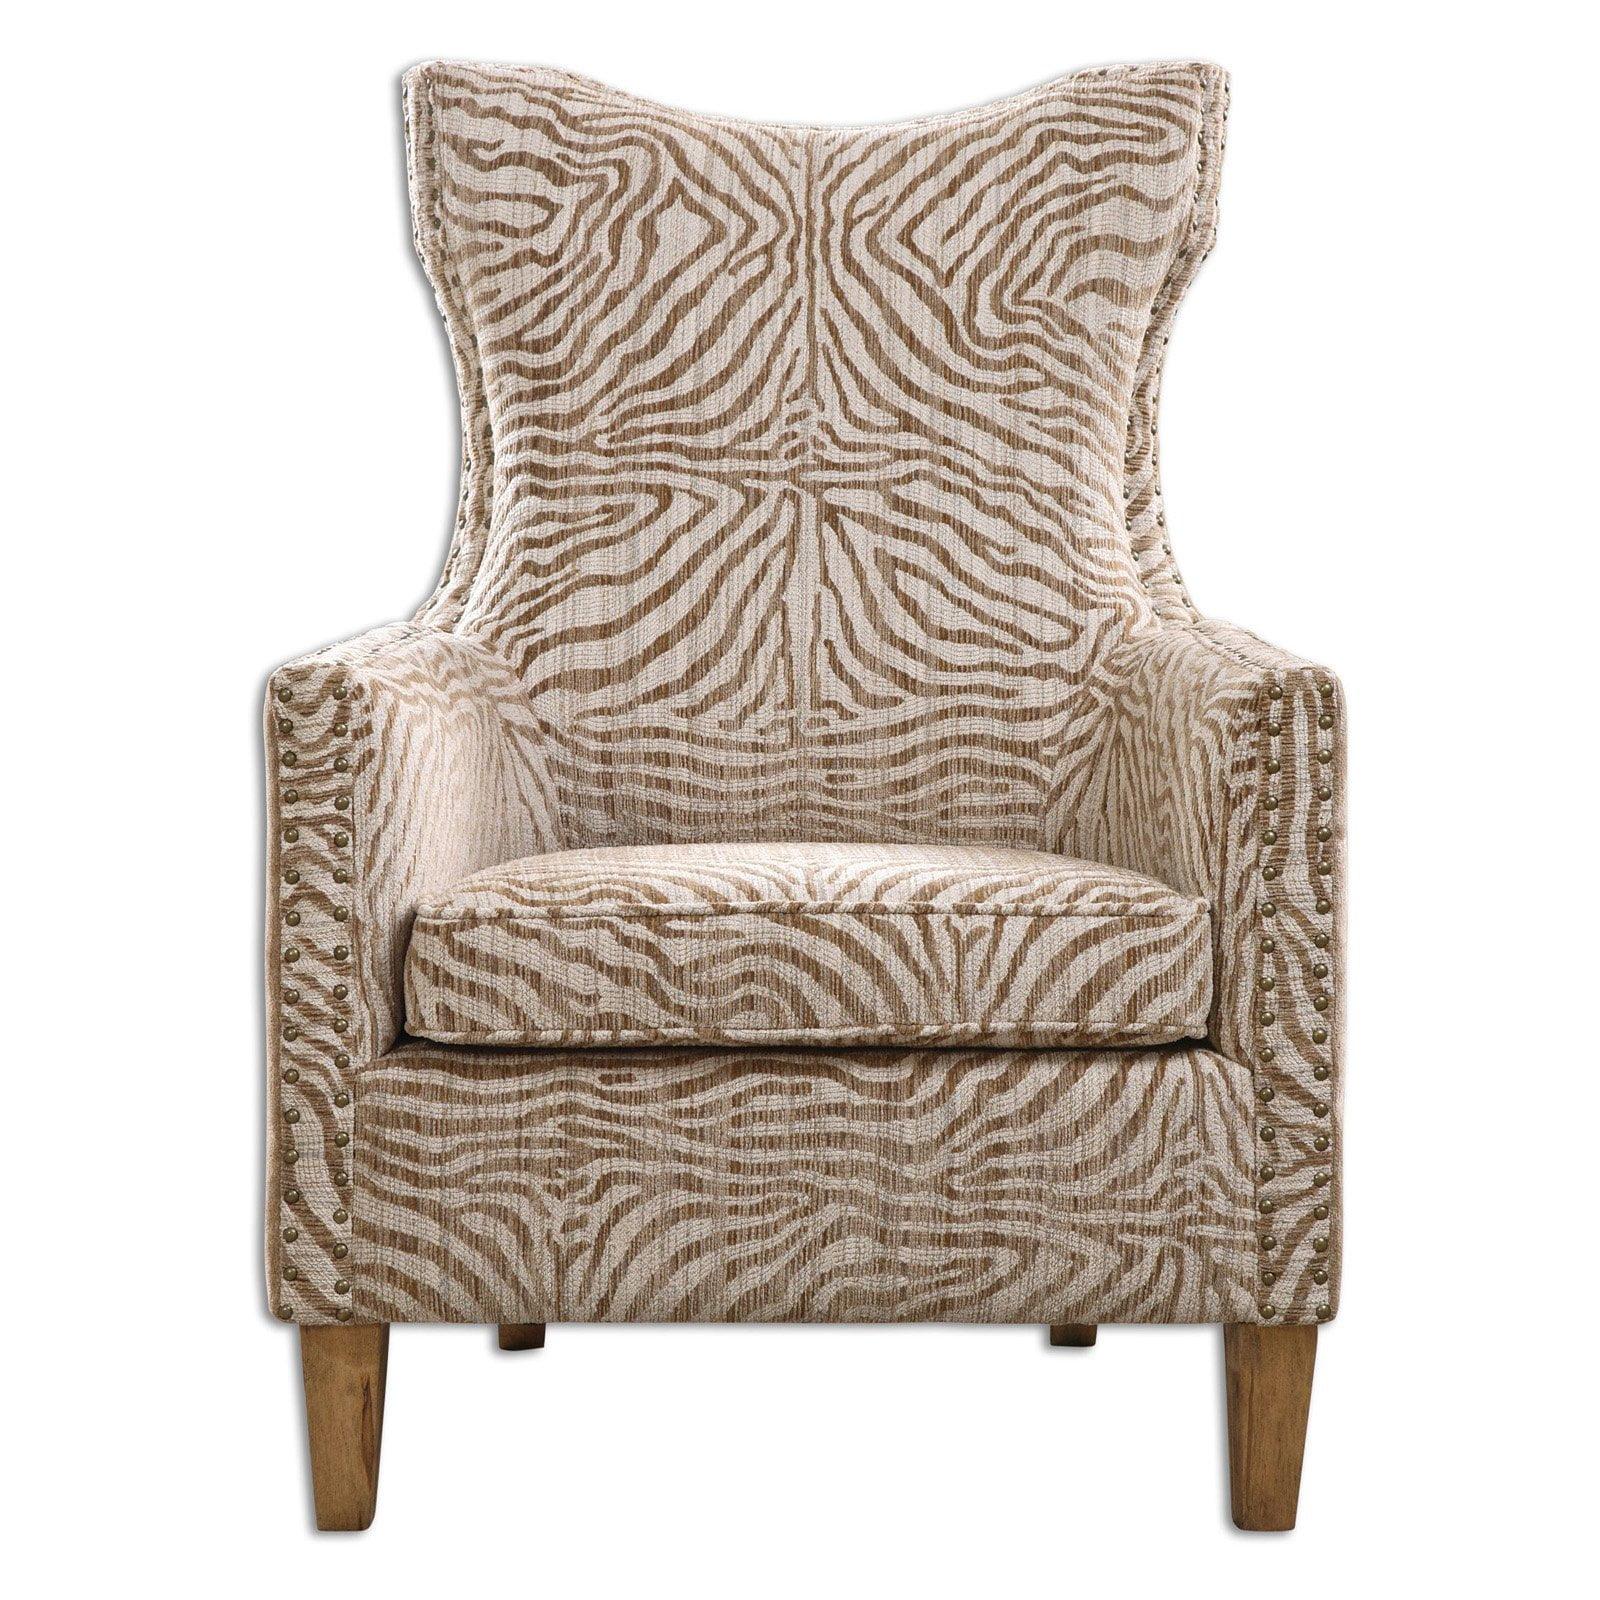 Transitional Wingback Chair in Brown with Nailhead Trim